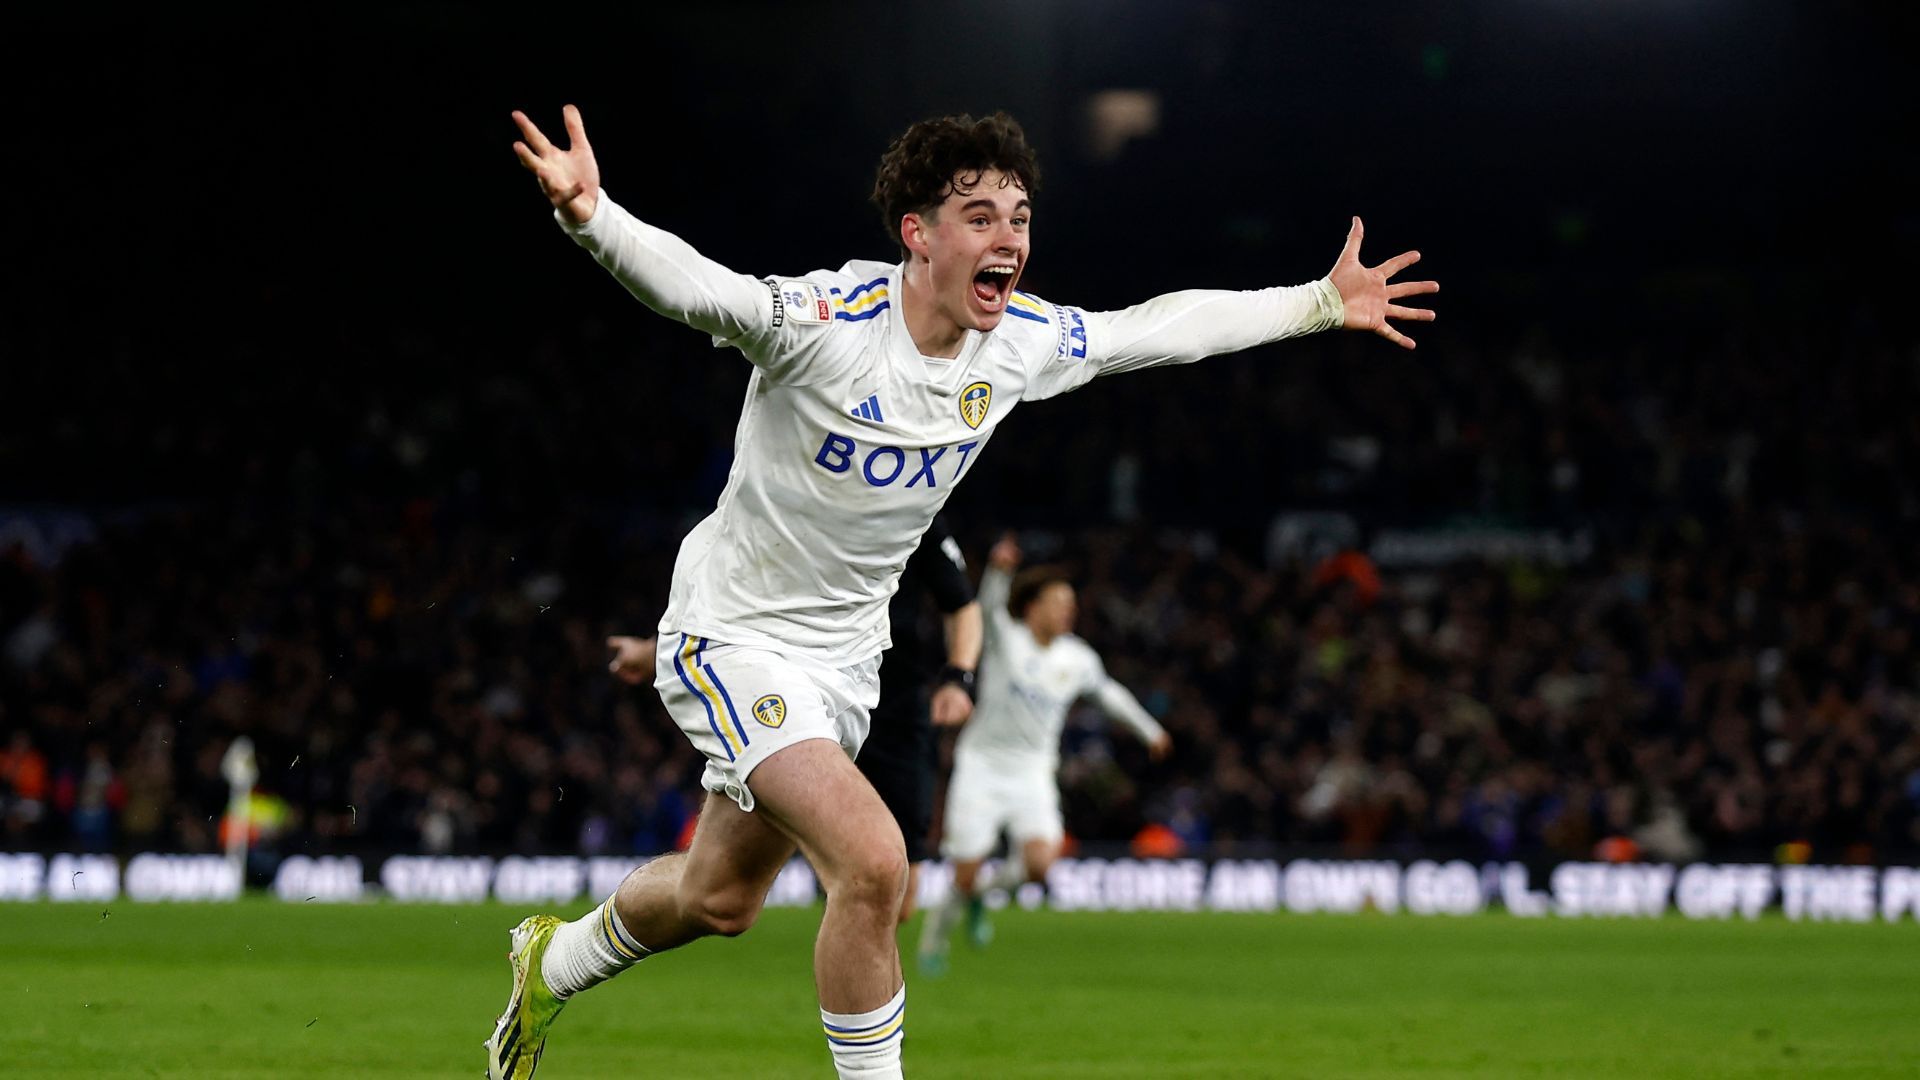 Leeds United proving tough negotiators with star player attracting